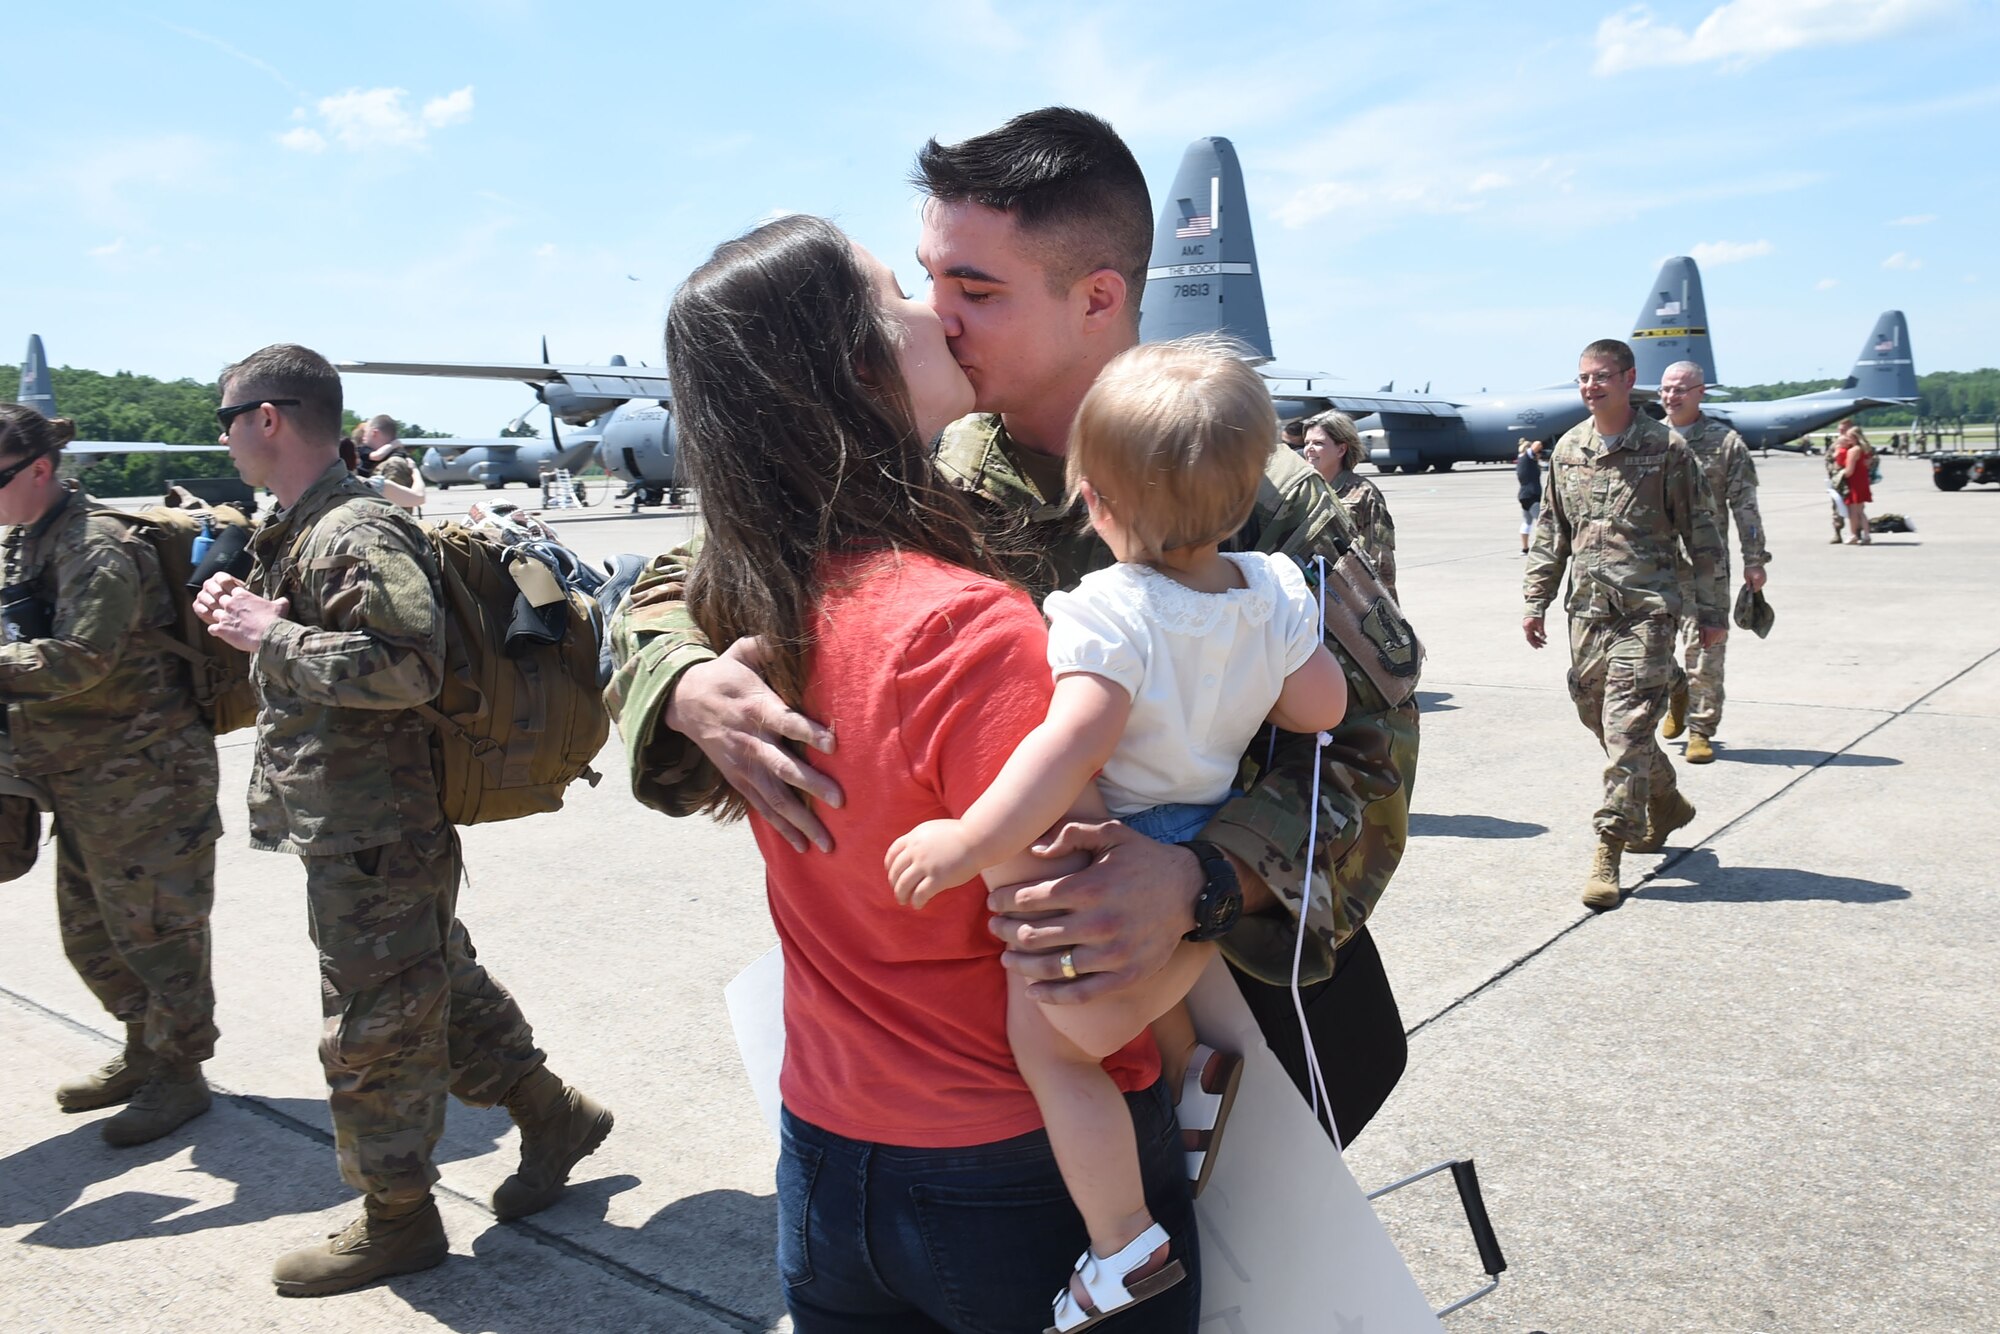 An Airman kisses his wife on the flight line